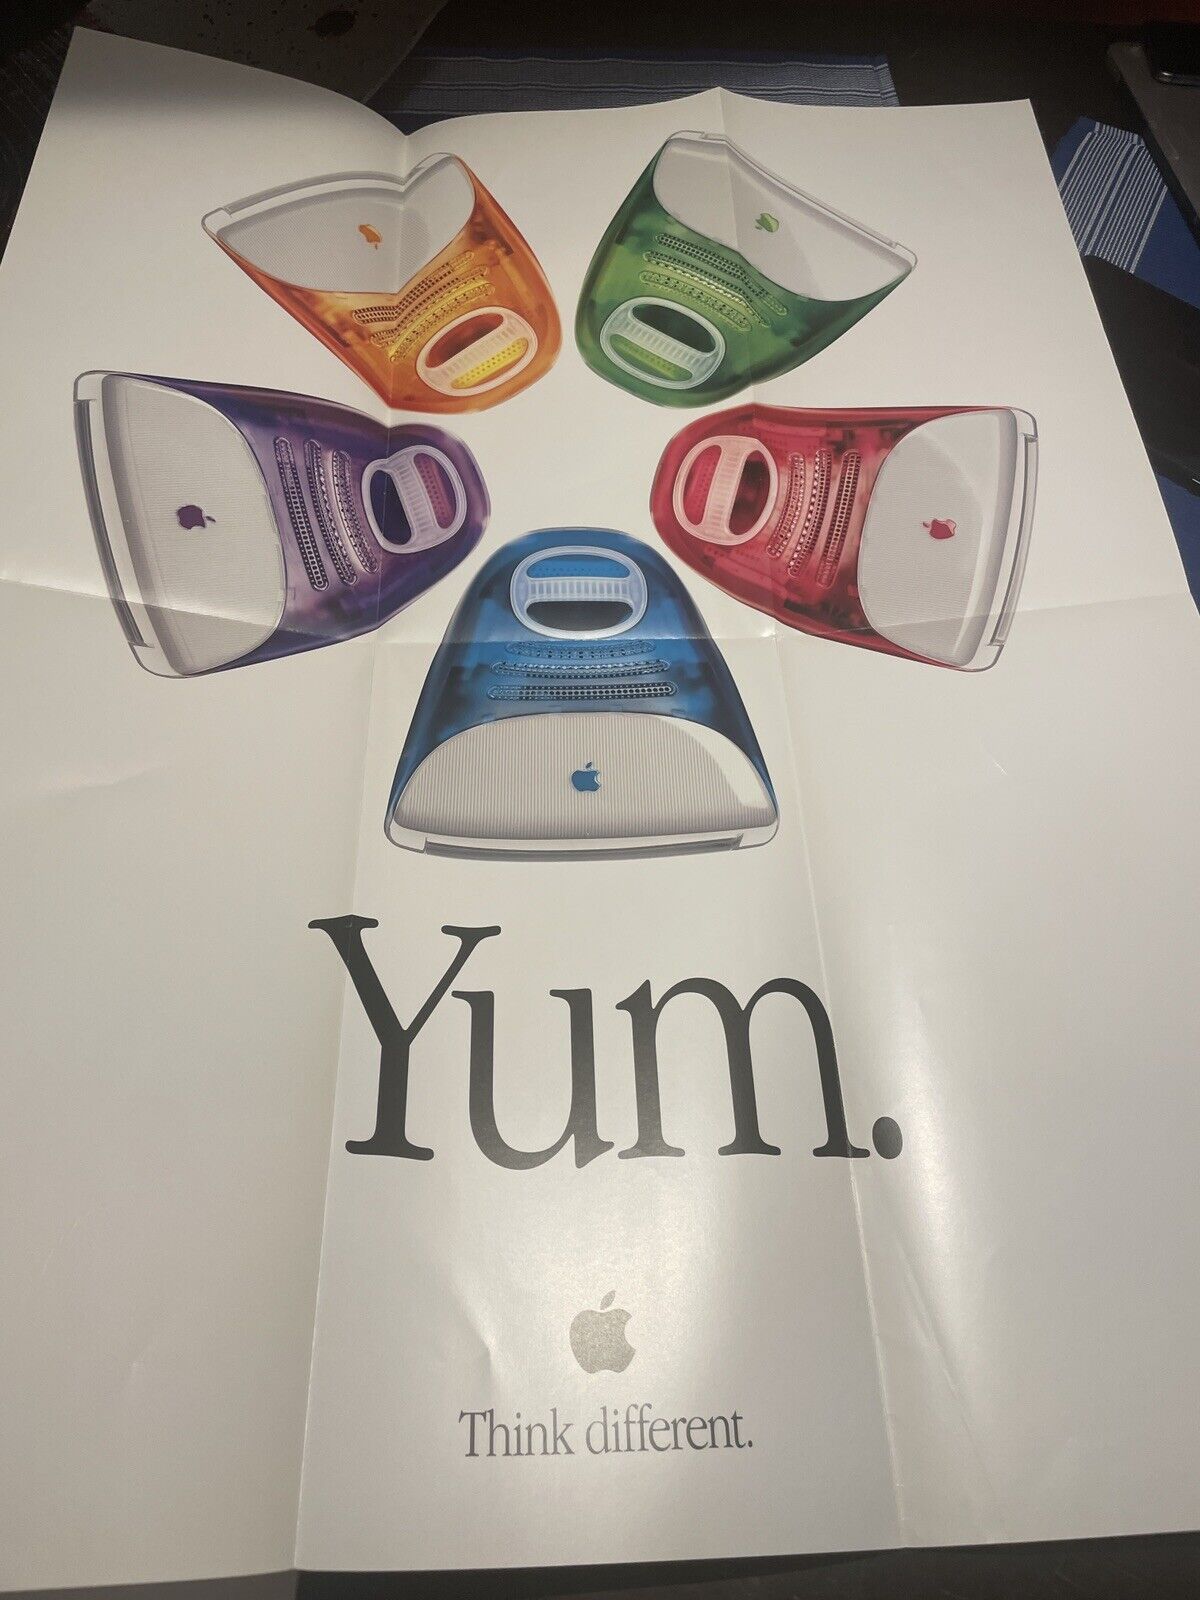 G3 iMac 5 flavours Think Different poster original and vintage 